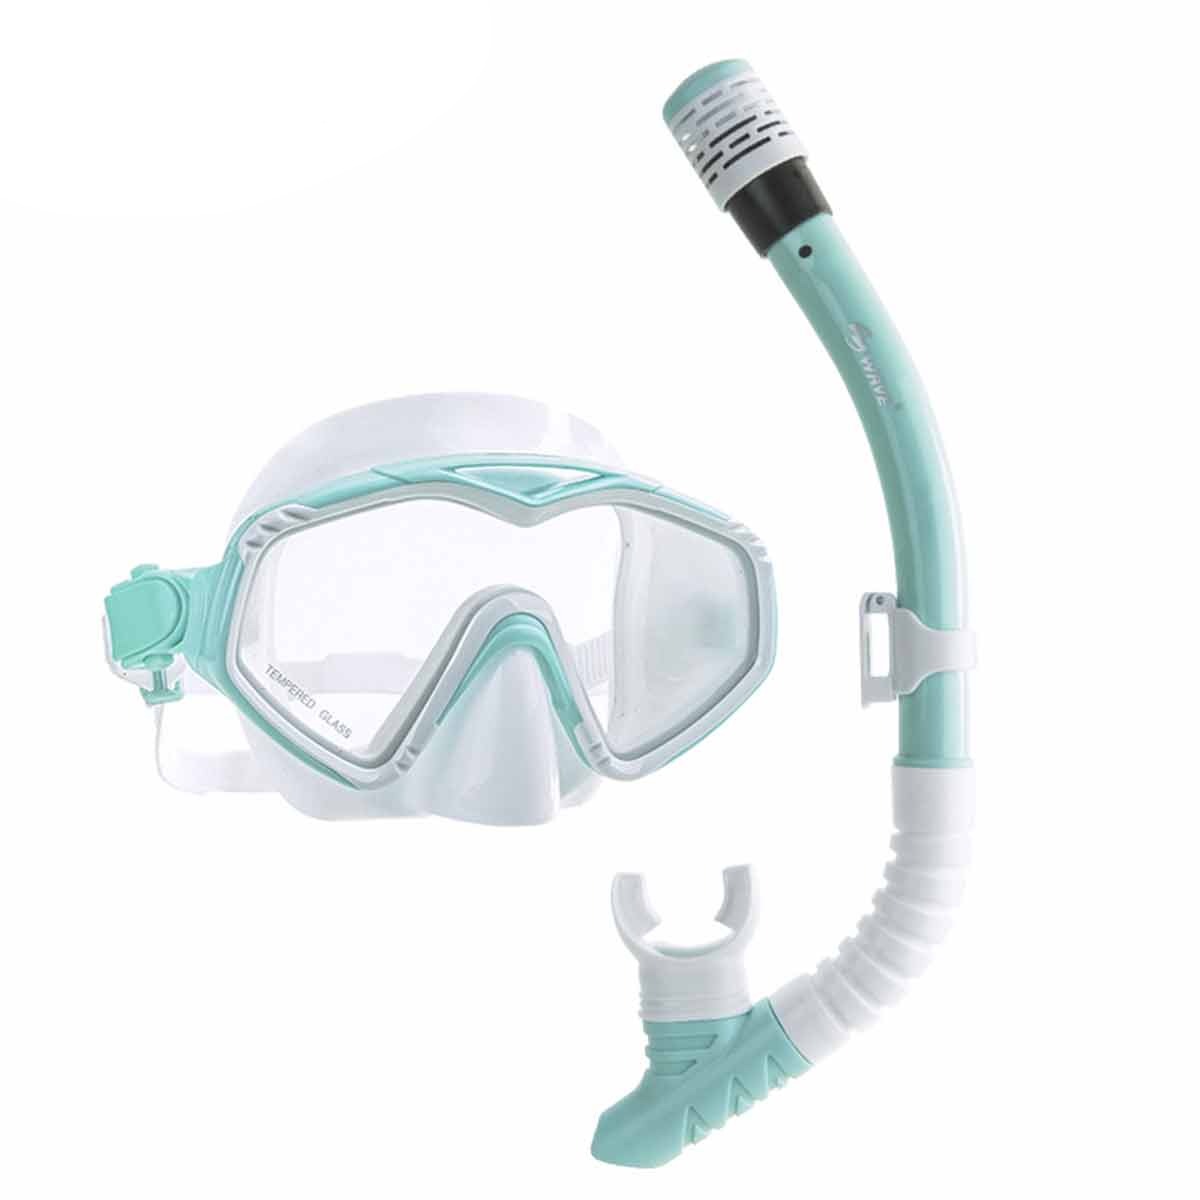 Wave Diving Snorkel Mask Set Kit Adult Swimming Silicone Resistant Tempered Glass